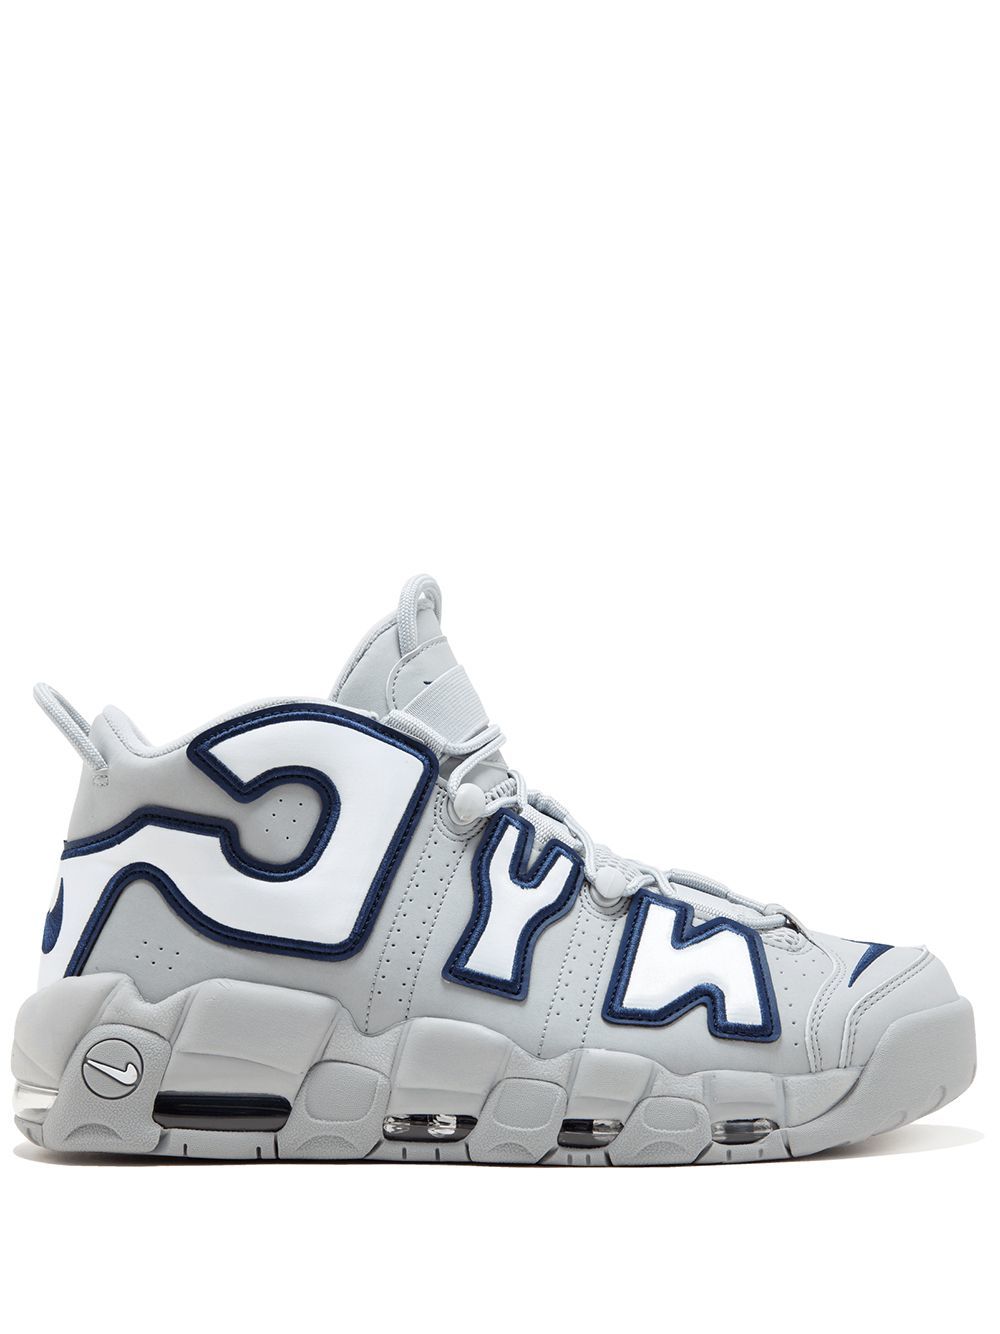 Nike Air More Uptempo Nyc Sneakers, $369 | farfetch.com | Lookastic